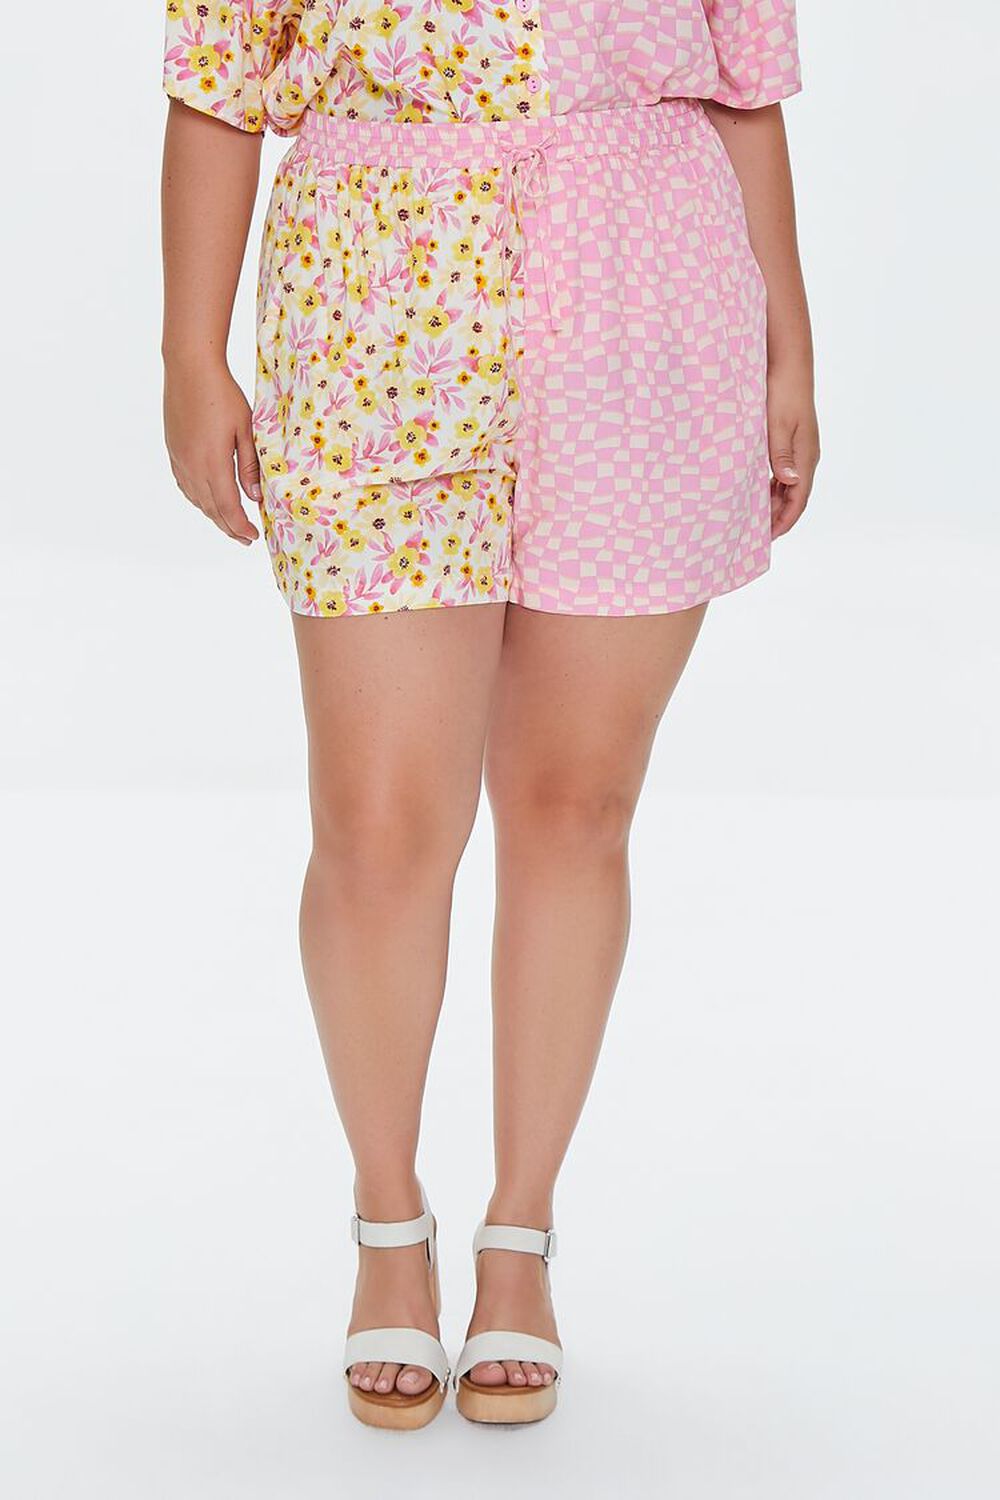 Plus Size Reworked Checkered Shorts, image 2